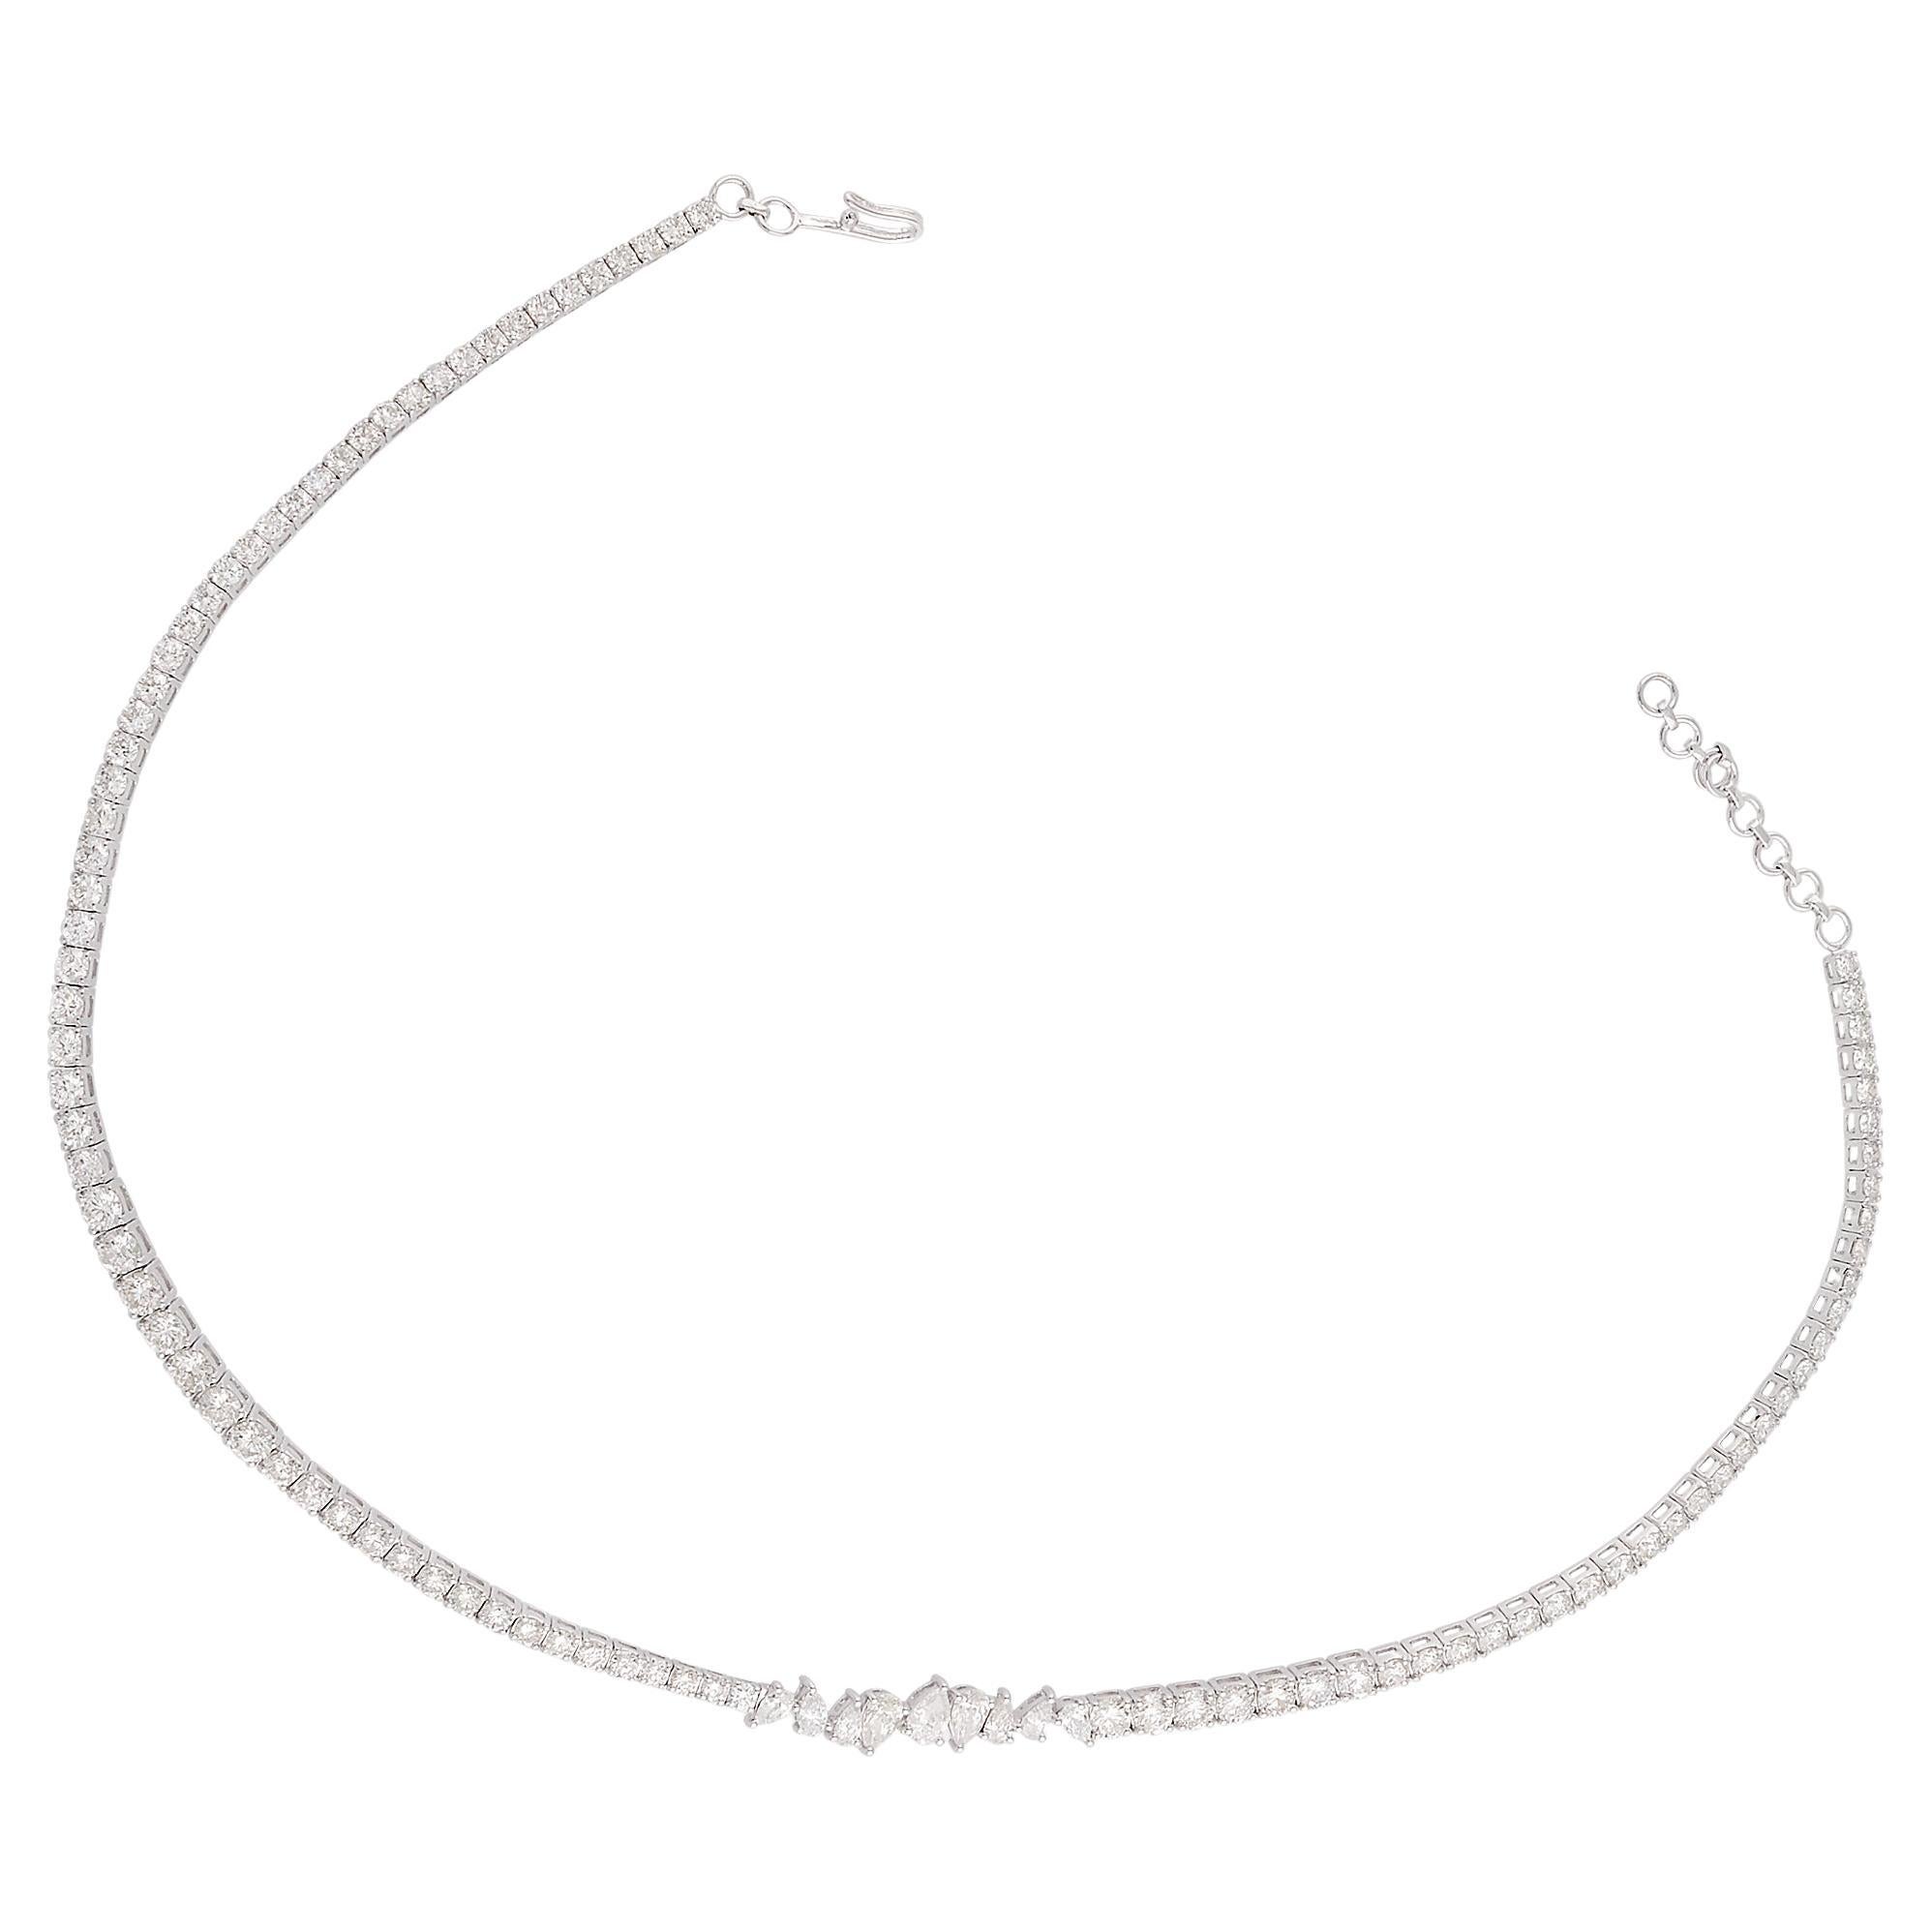 8.7Ct SI Clarity HI Color Pear Round Diamond Choker Necklace 18 Karat White Gold For Sale